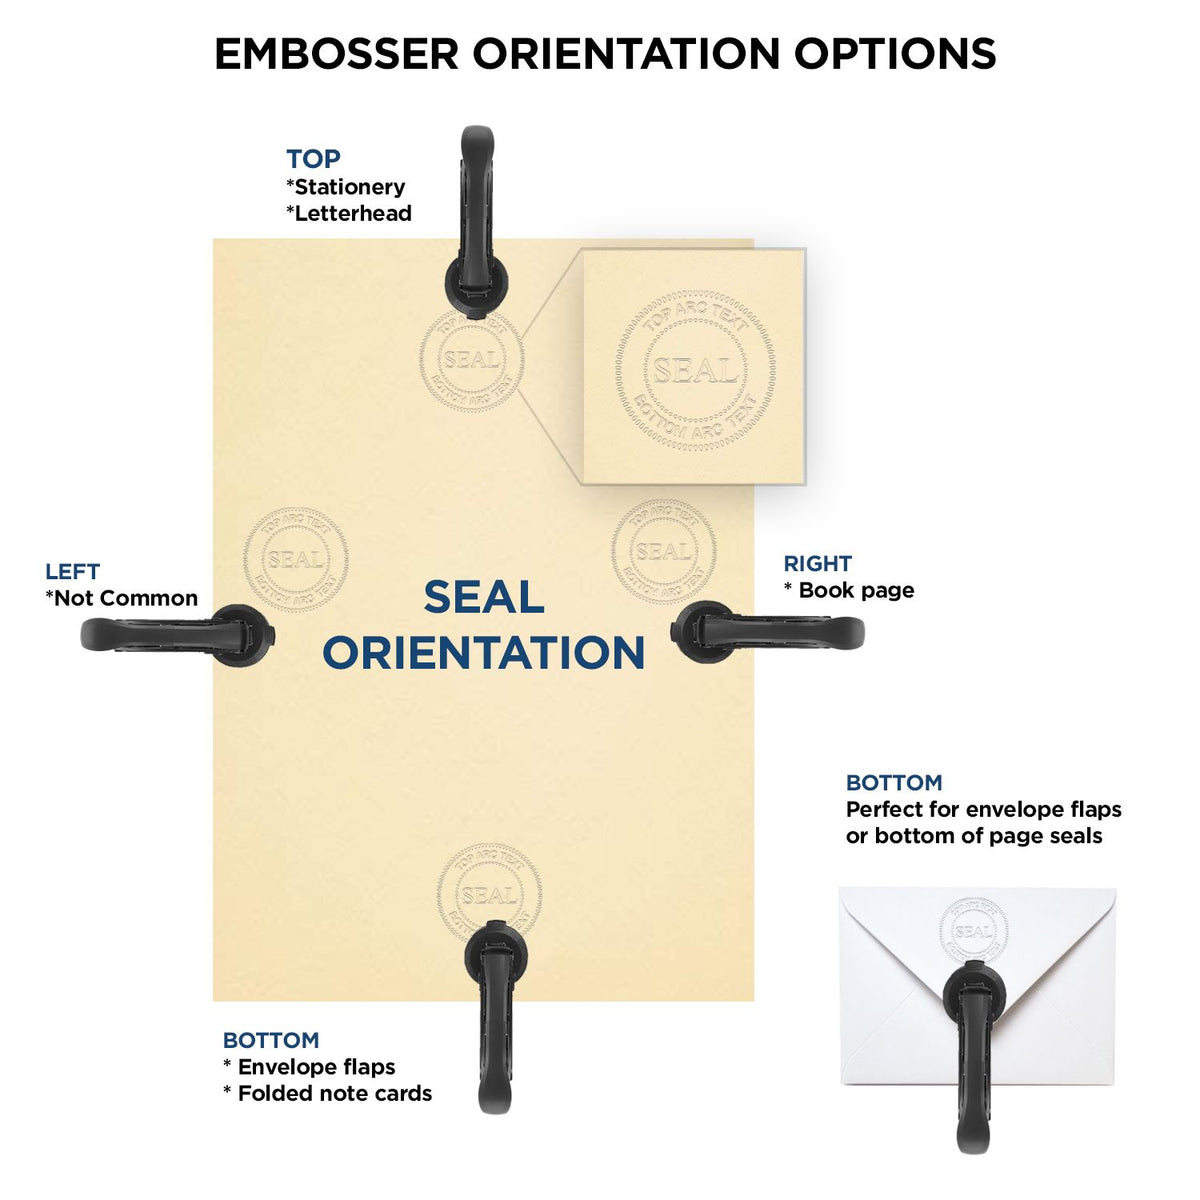 An infographic for the Soft New Hampshire Professional Engineer Seal showing embosser orientation, this is showing examples of a top, bottom, right and left insert.